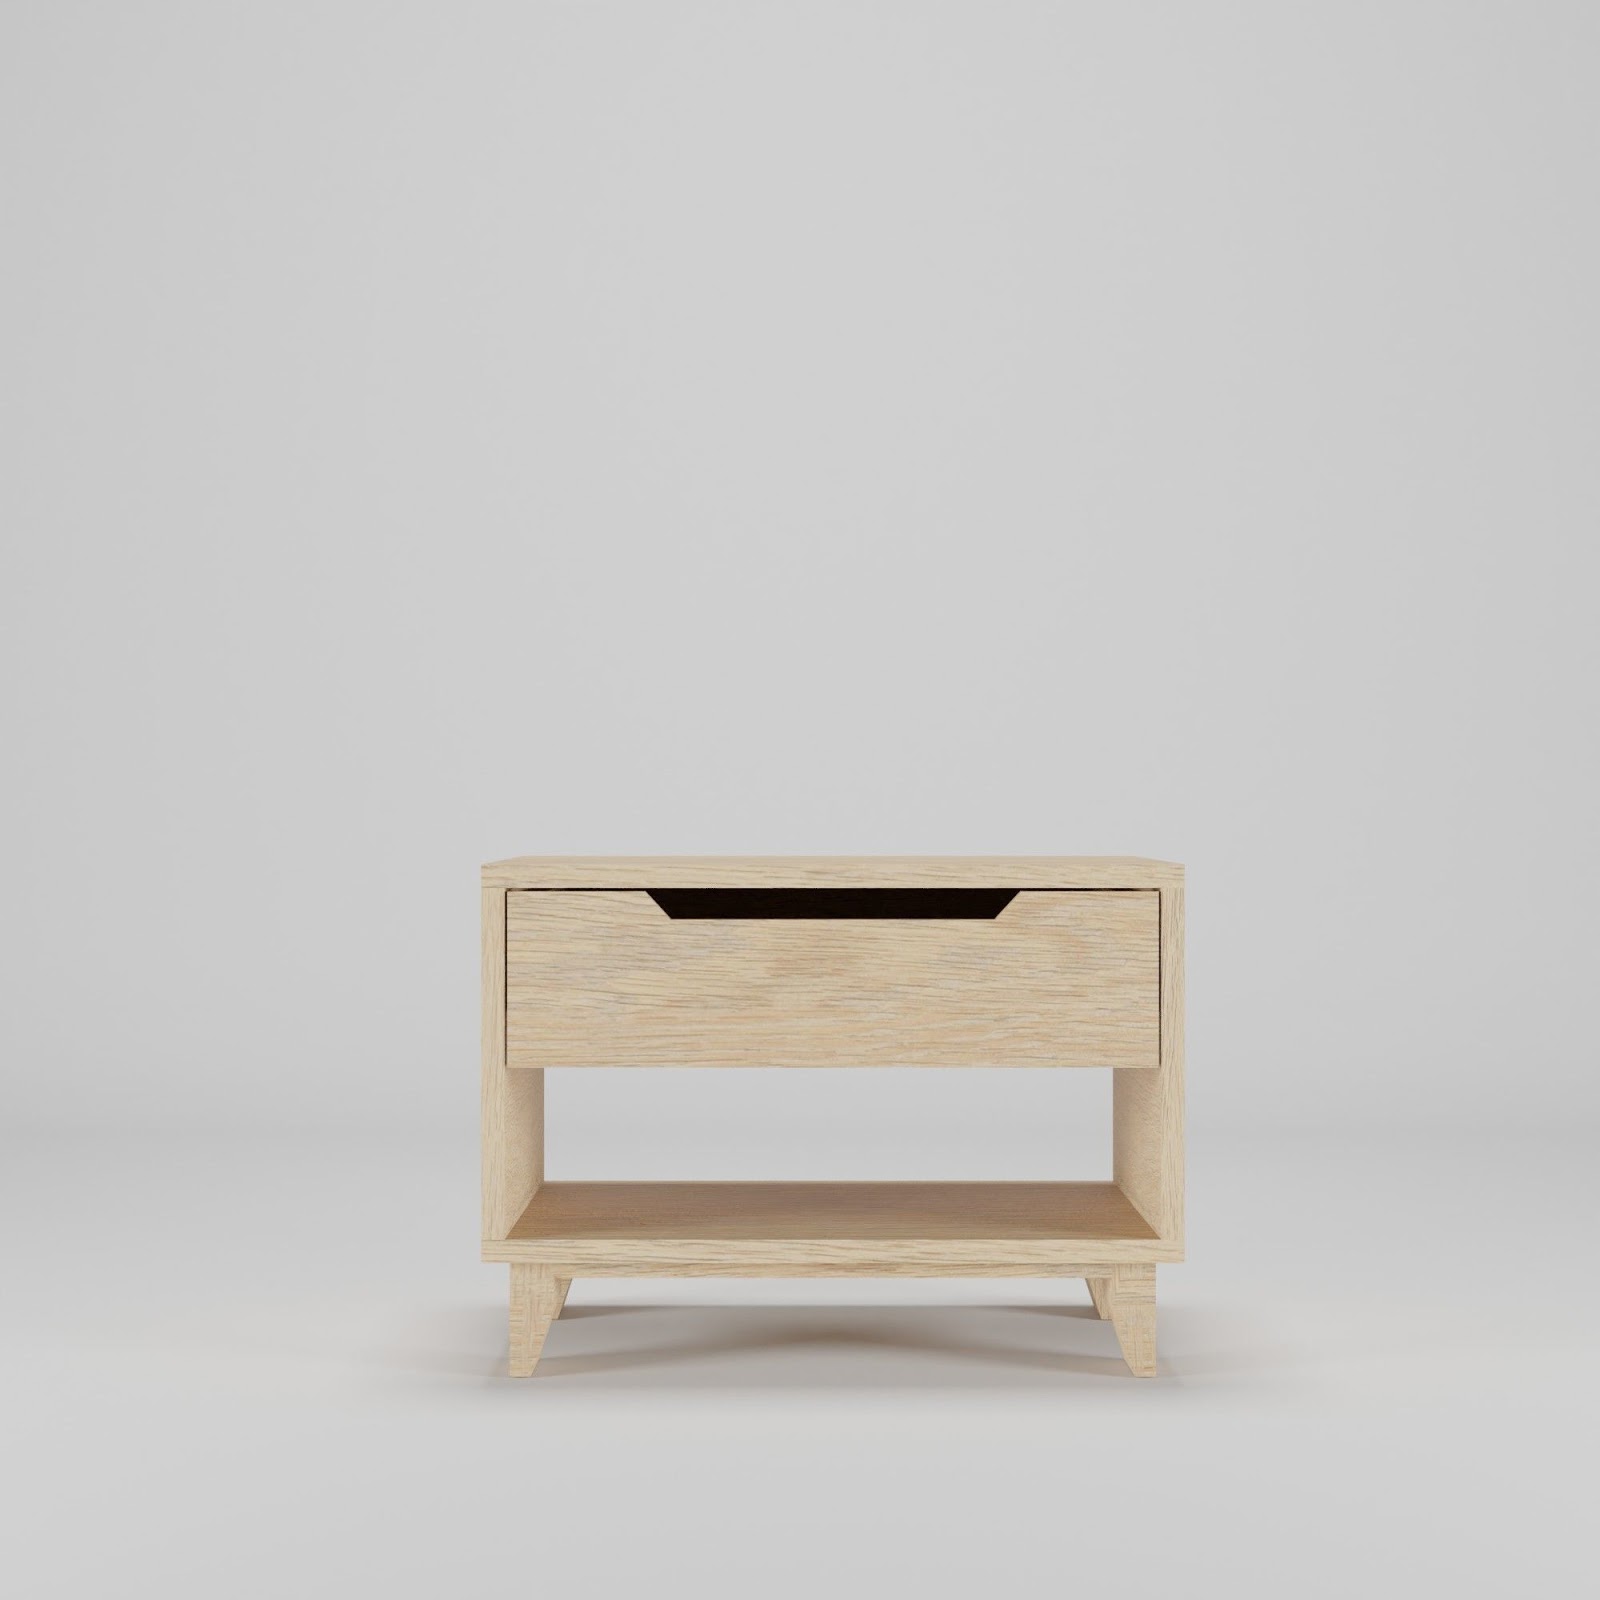 Bedside table with drawer Free low-poly 3D model,Art Cam, Stl File